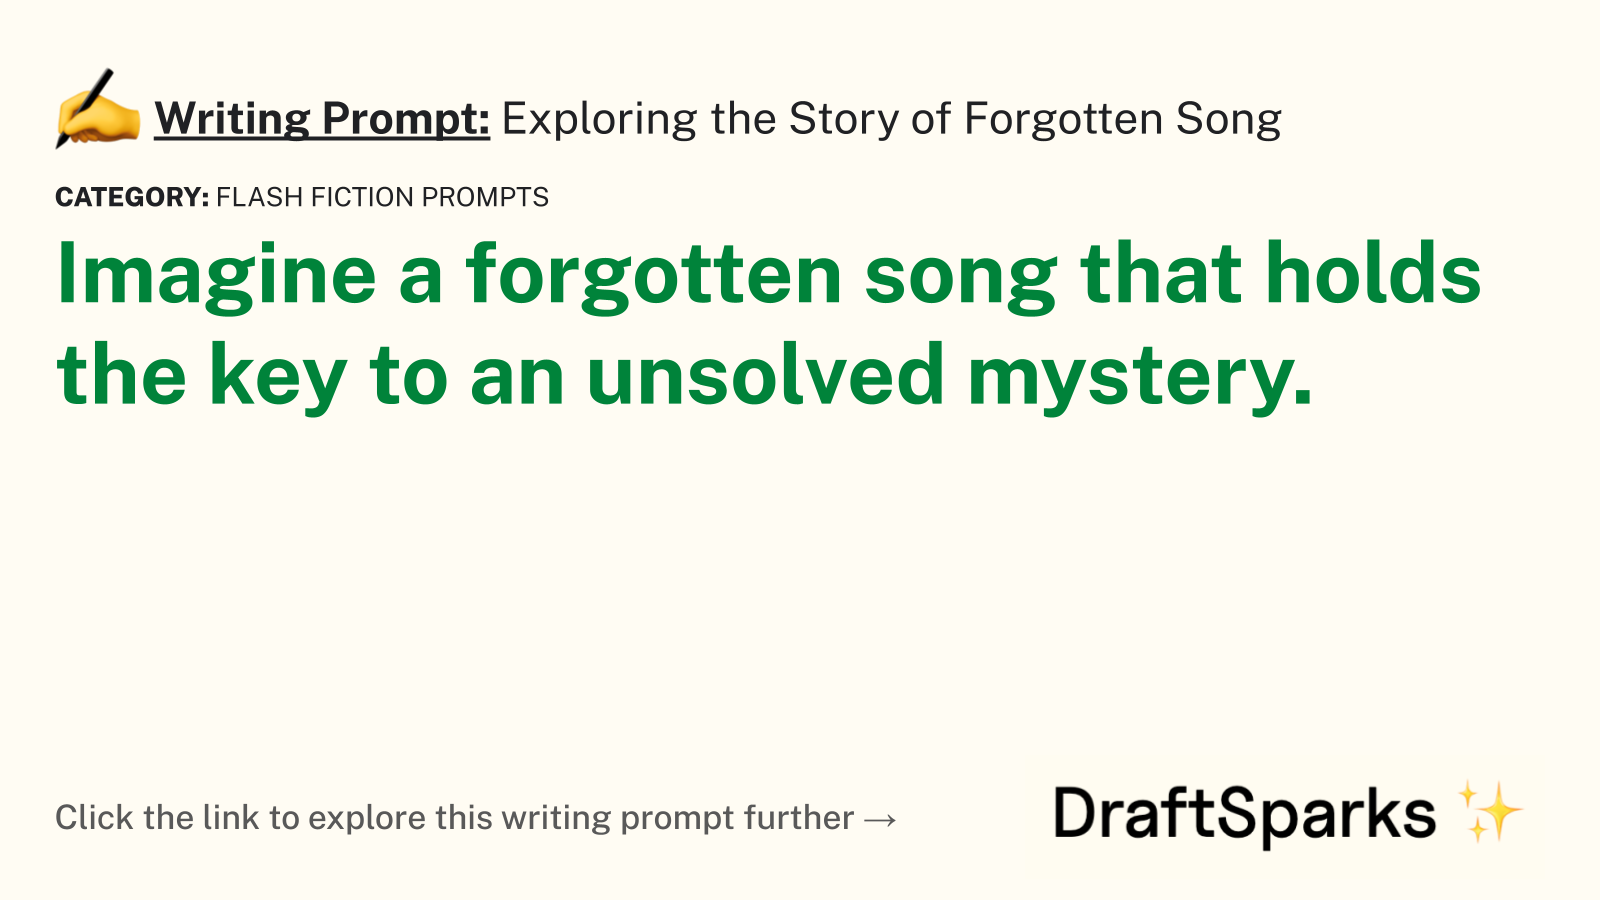 Exploring the Story of Forgotten Song